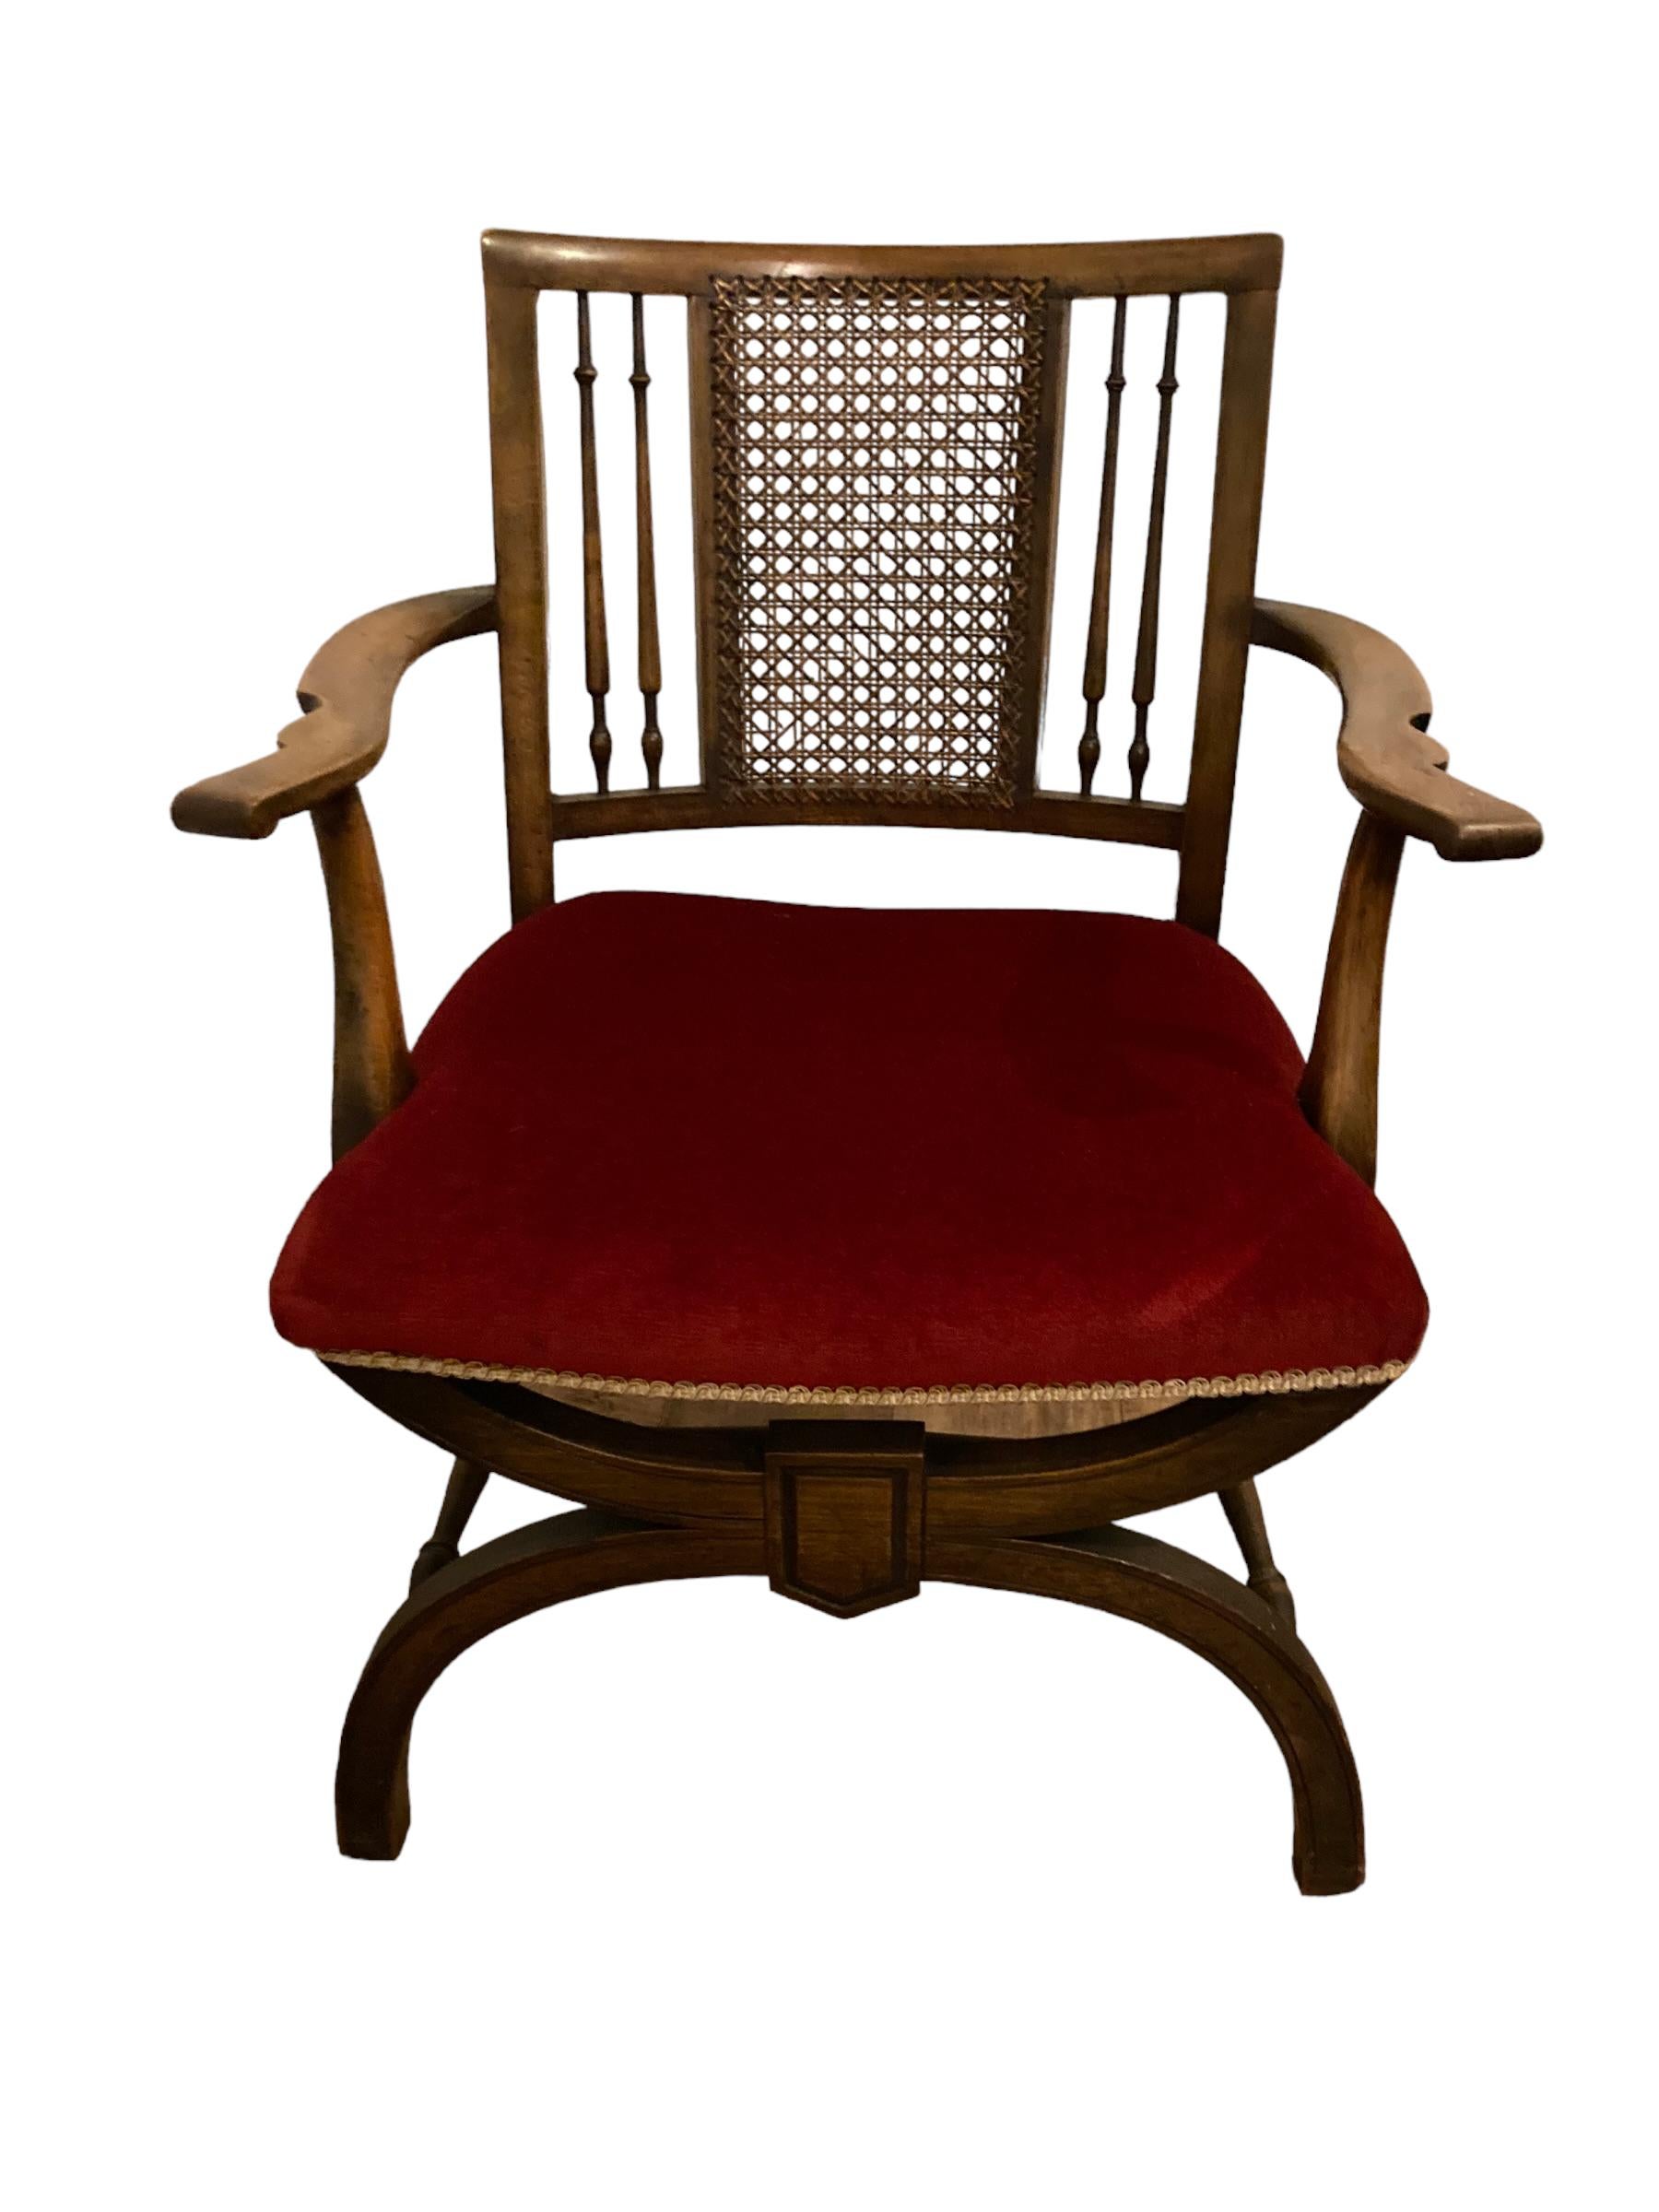 A rare Antique Beech Wood X Framed Cane back Arm chair For Sale 3